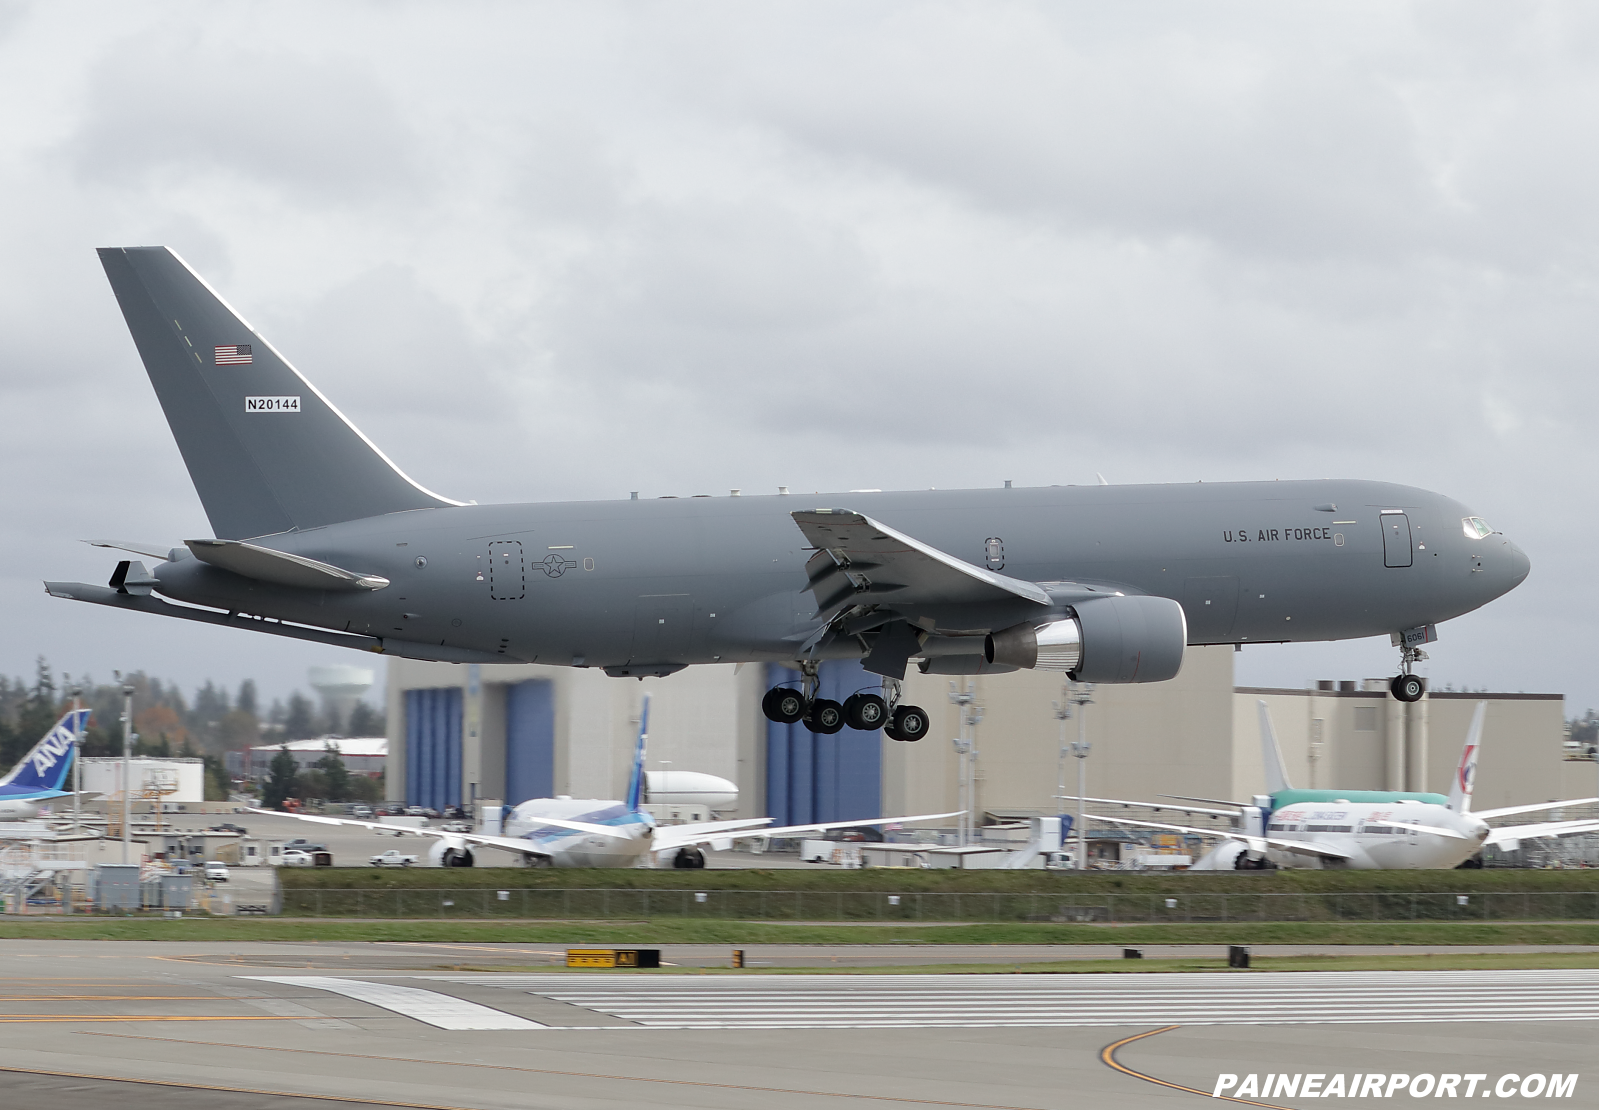 KC-46A 19-46061 at KPAE Paine Field